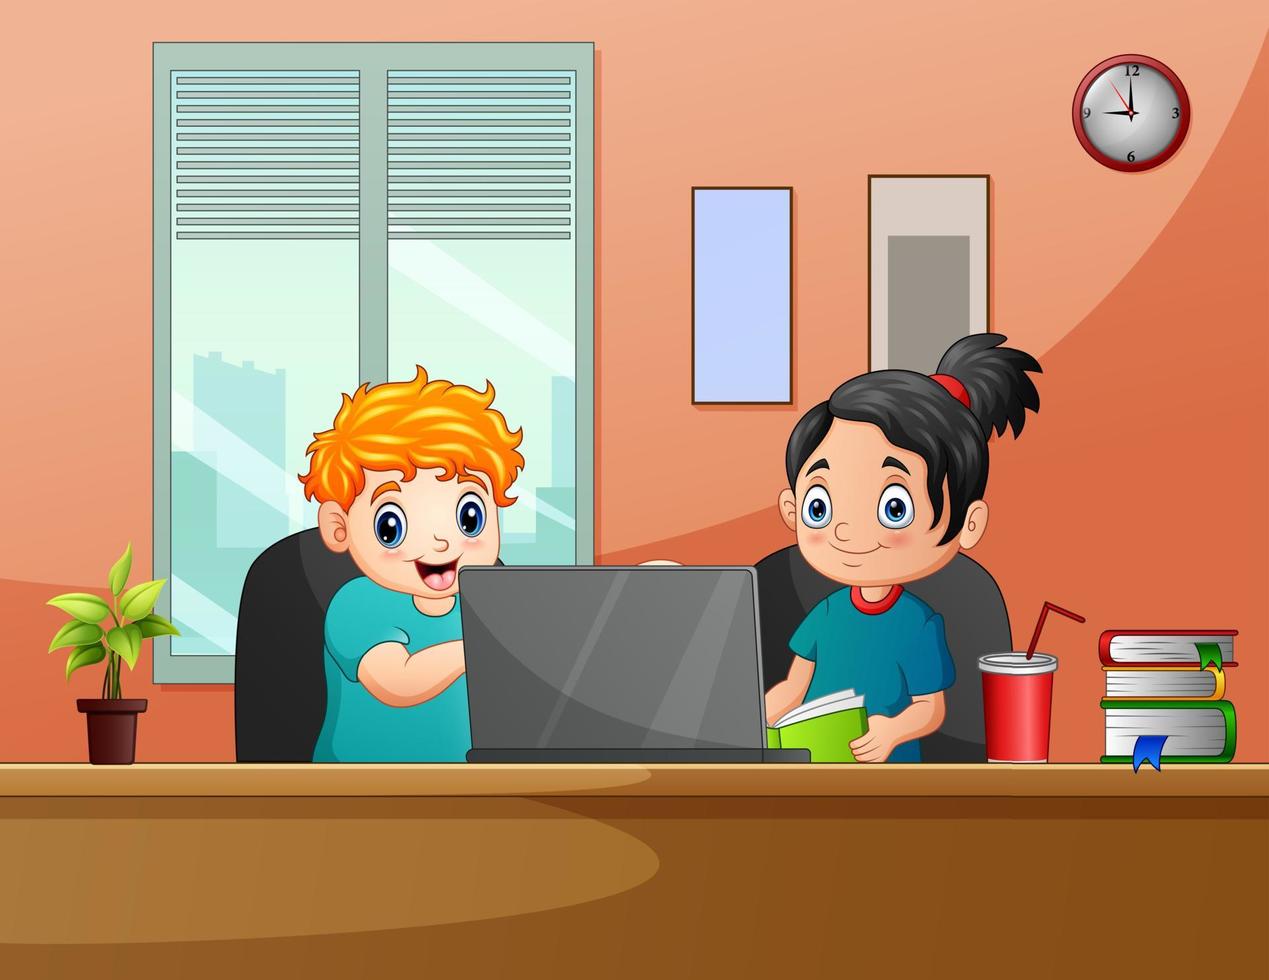 Cartoon the children playing with computer in the desk vector